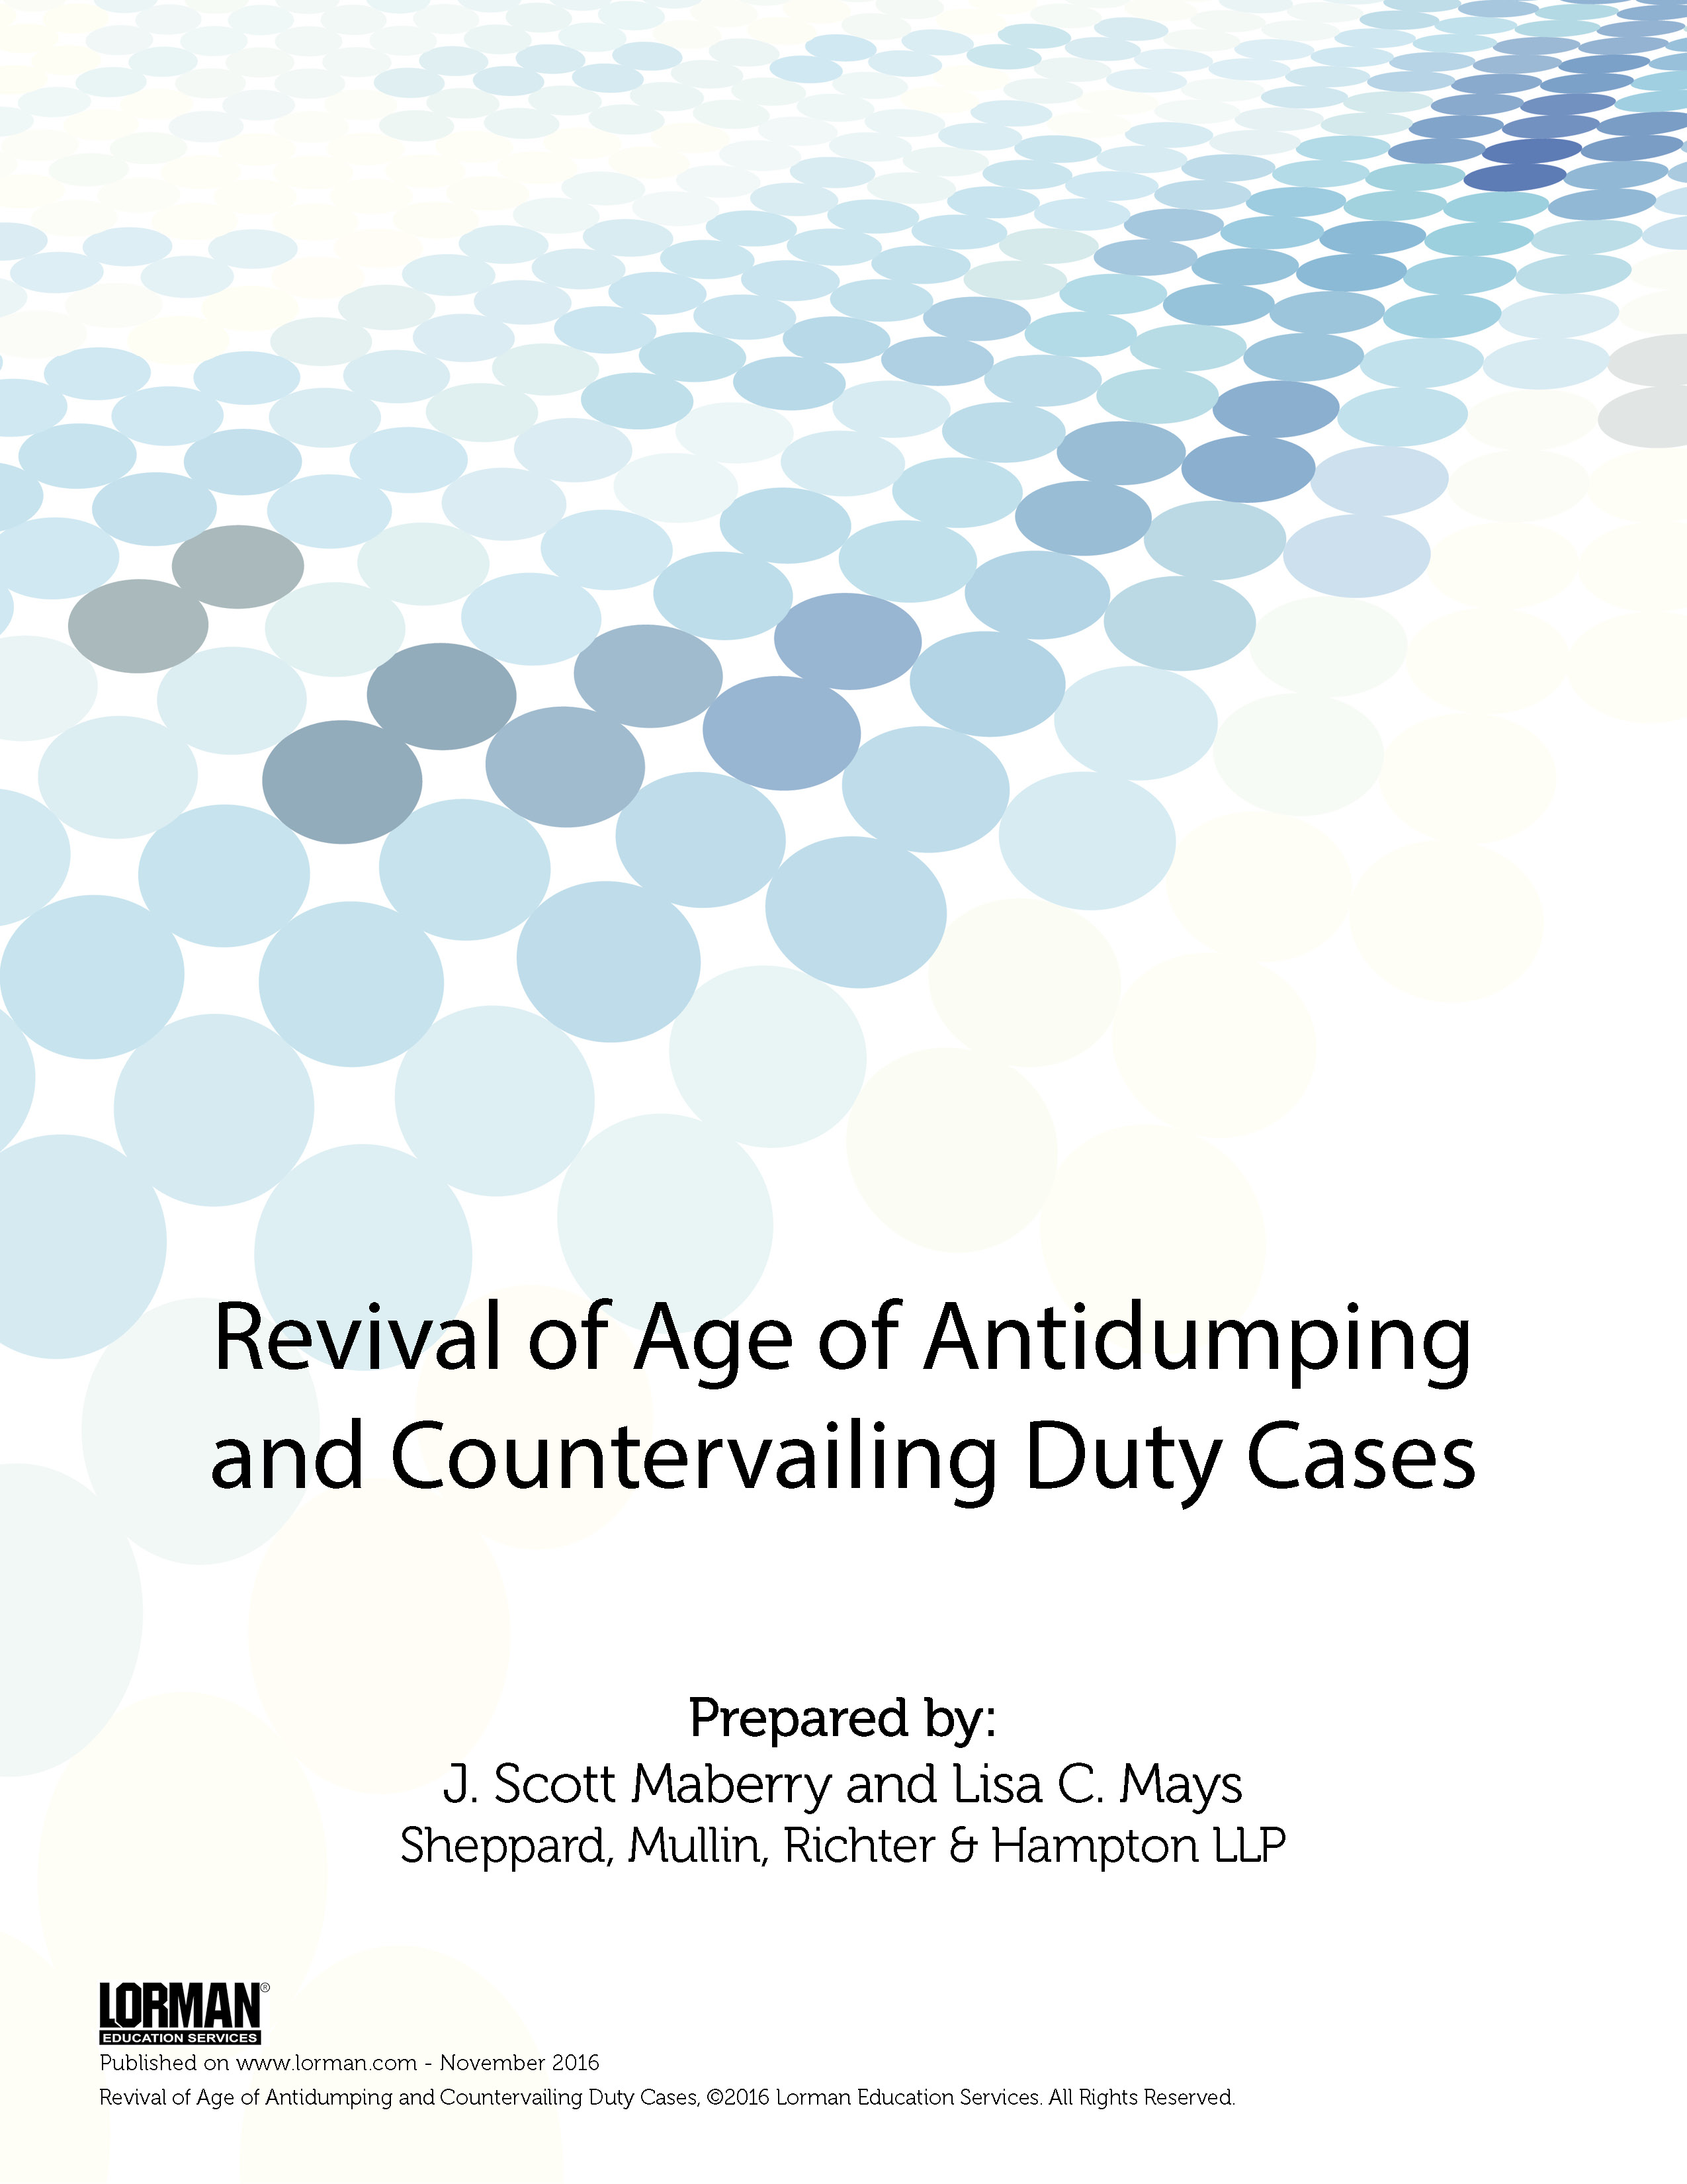 Revival of Age of Antidumping and Countervailing Duty Cases